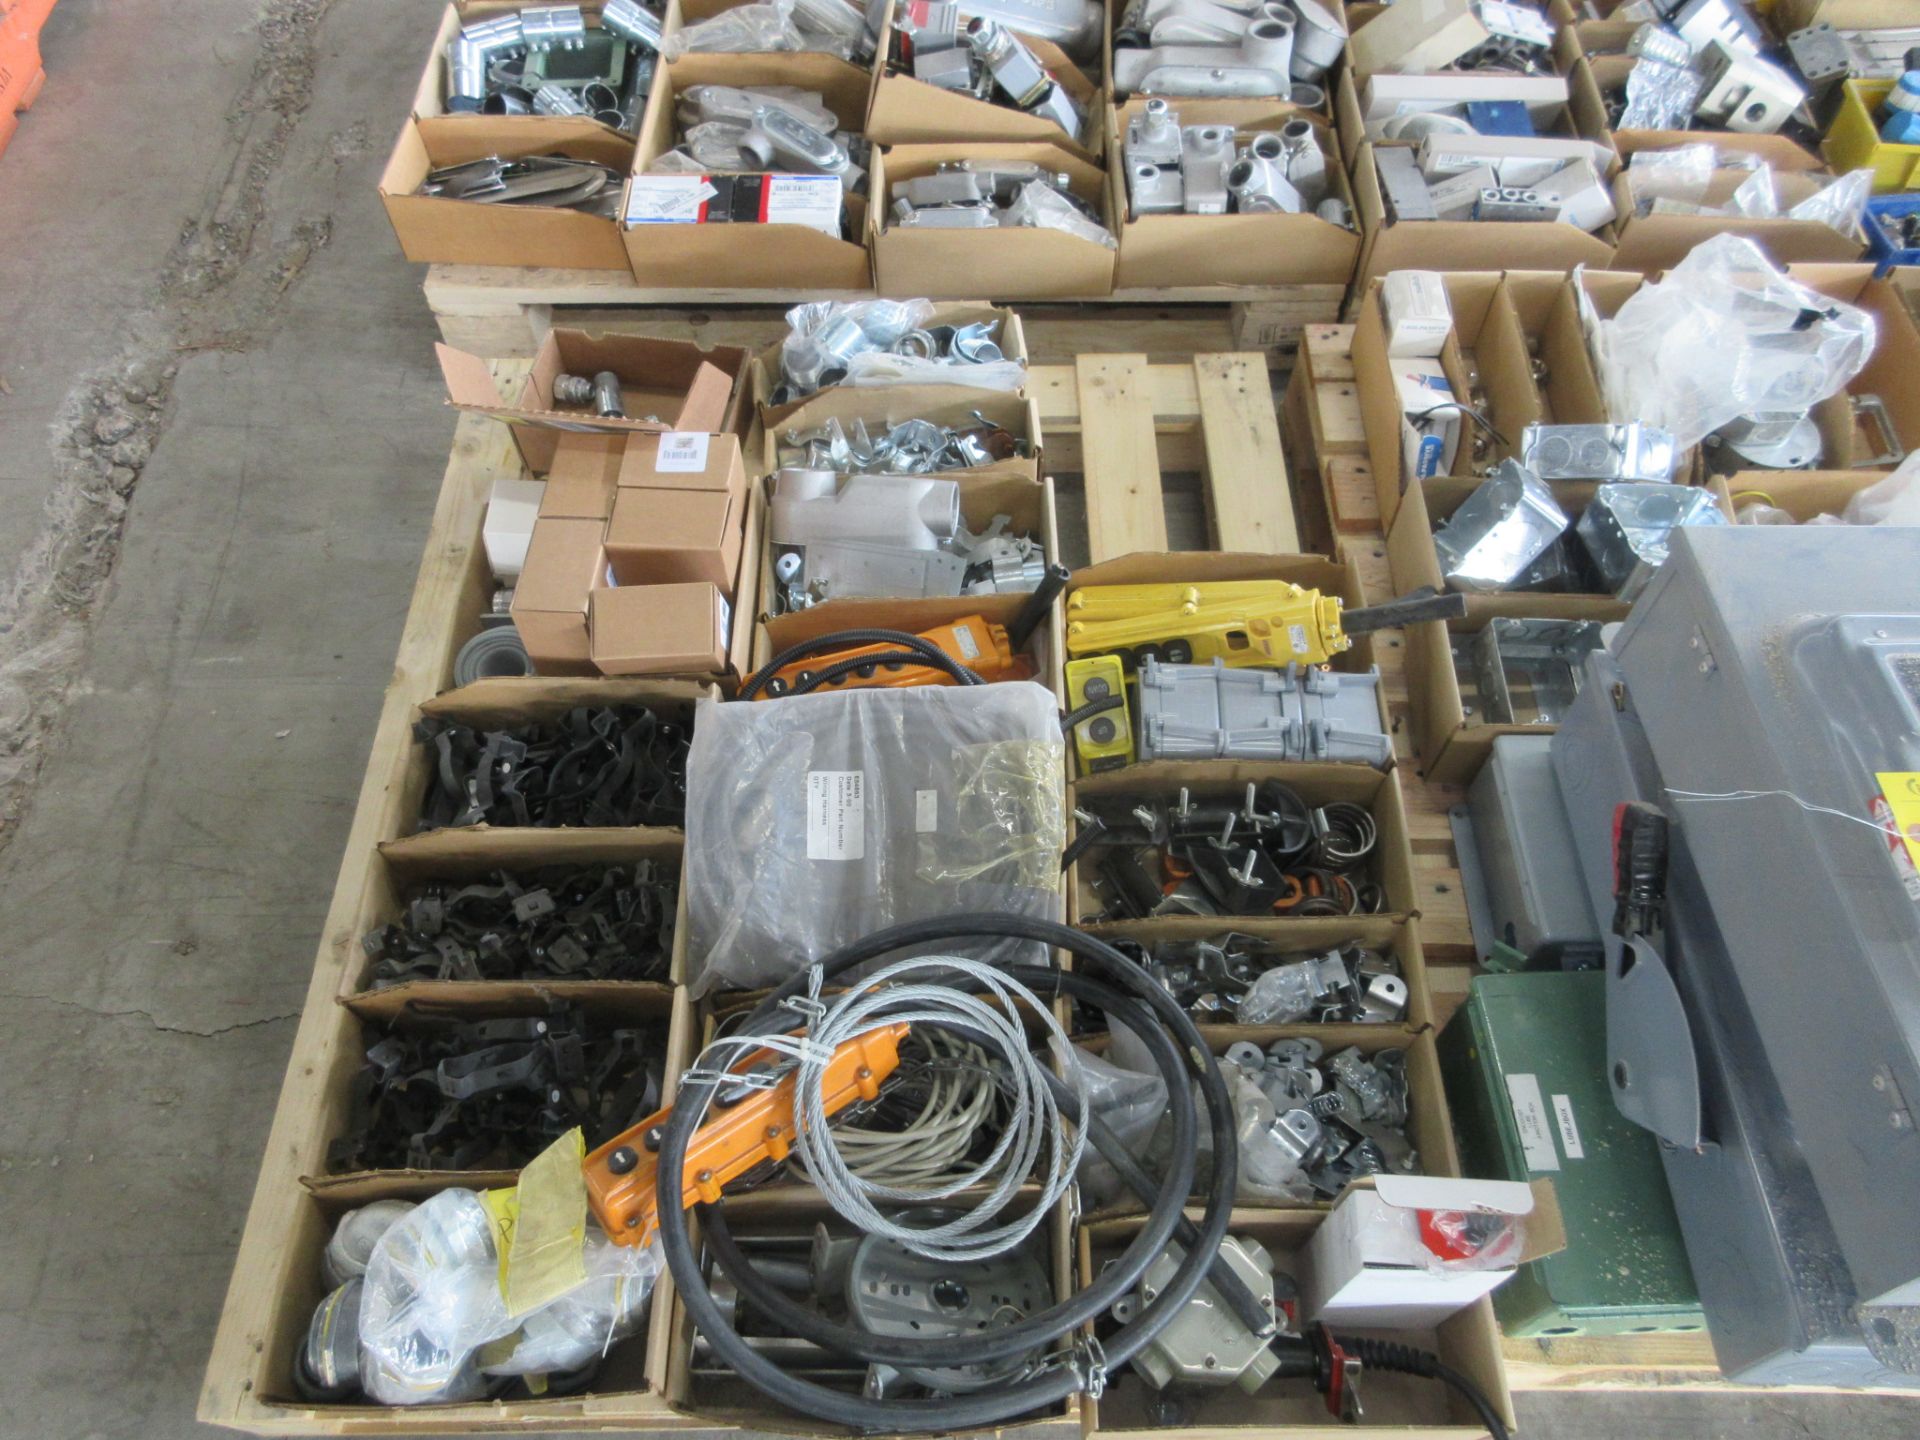 LOT OF ELECTRICAL COMPONENTS / BOXES ON (4) PALLETS (SOUTHWEST WAREHOUSE) - Image 3 of 5